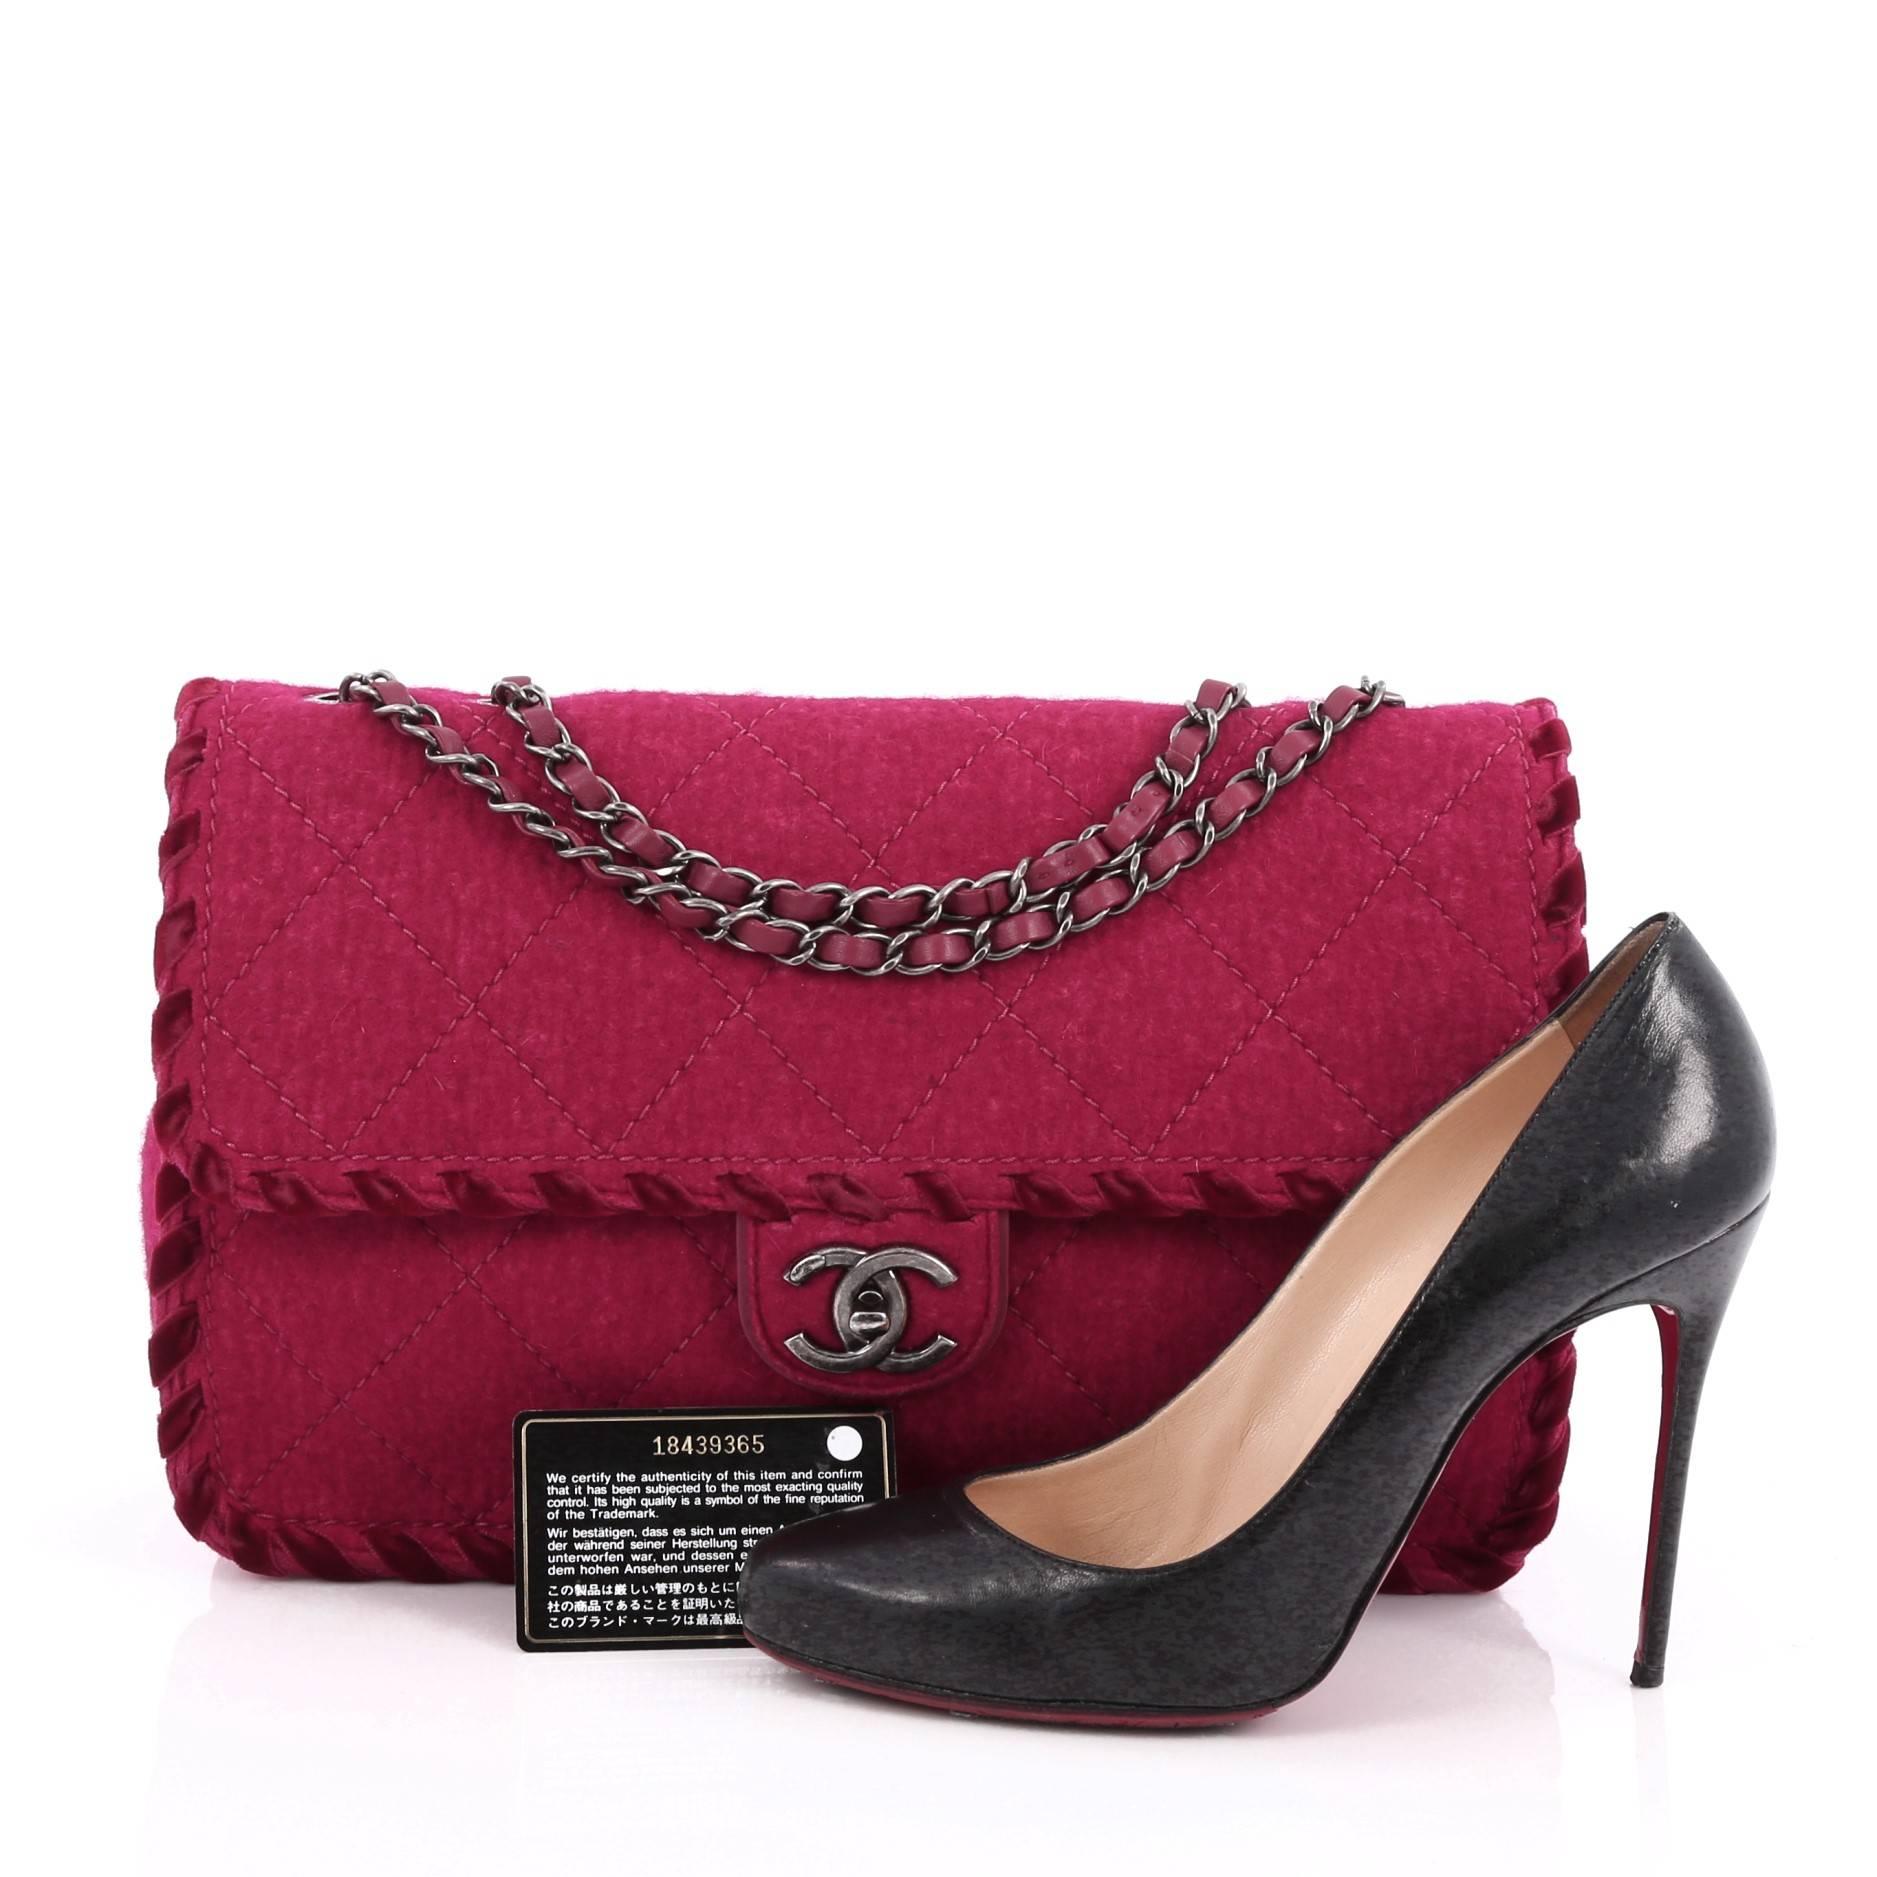 CHANEL WHIPSTITCH FLAP BAG QUILTED FELT JUMBO DESCRIPTION 
This authentic Chanel Whipstitch Flap Bag Quilted Felt Jumbo from the brand's Spring 2015 Collection is a modern, romantic essential made for any modern woman. Crafted in magenta felt, this